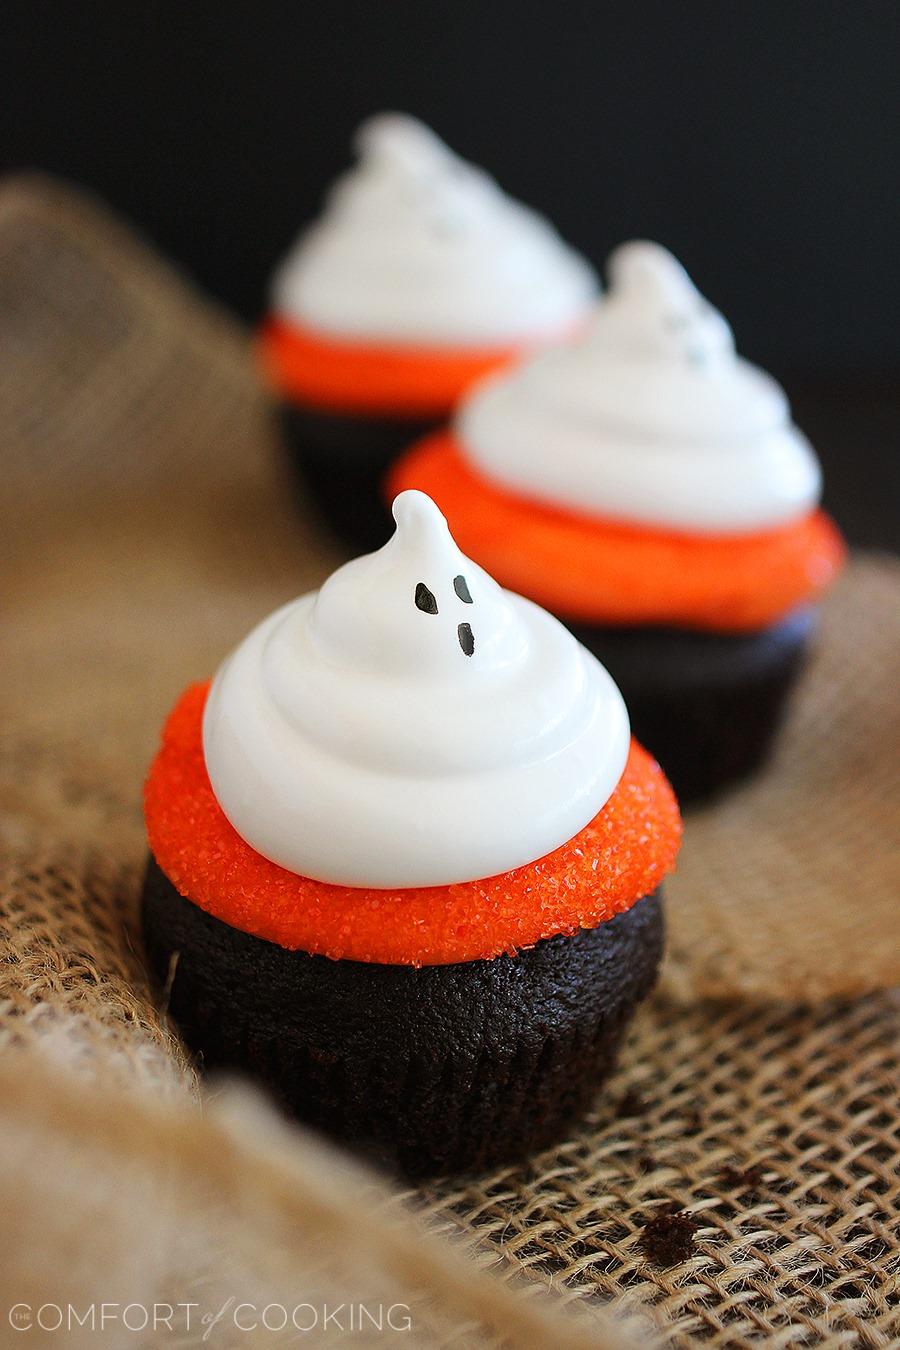 Dark Chocolate Cupcakes with Meringue Ghosts – Decadent dark chocolate cupcakes with fluffy meringue ghosts make for a scrumptious, spooky Halloween treat! | thecomfortofcooking.com